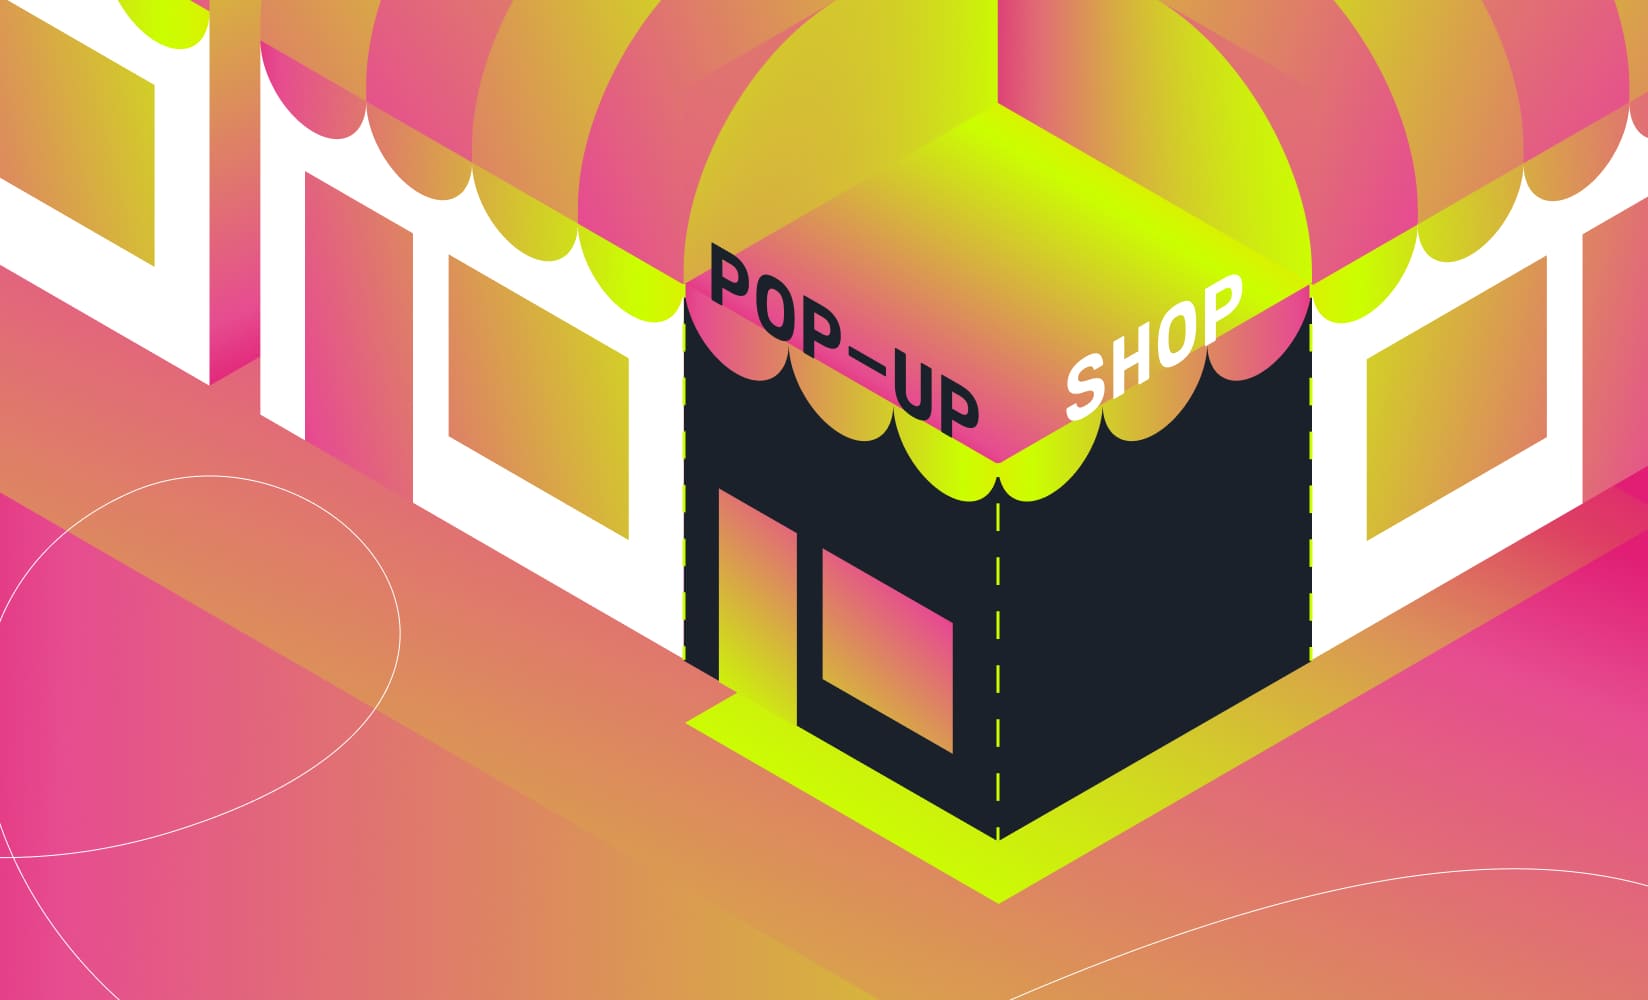 How Temporary Pop-Ups Became a Permanent Strategy